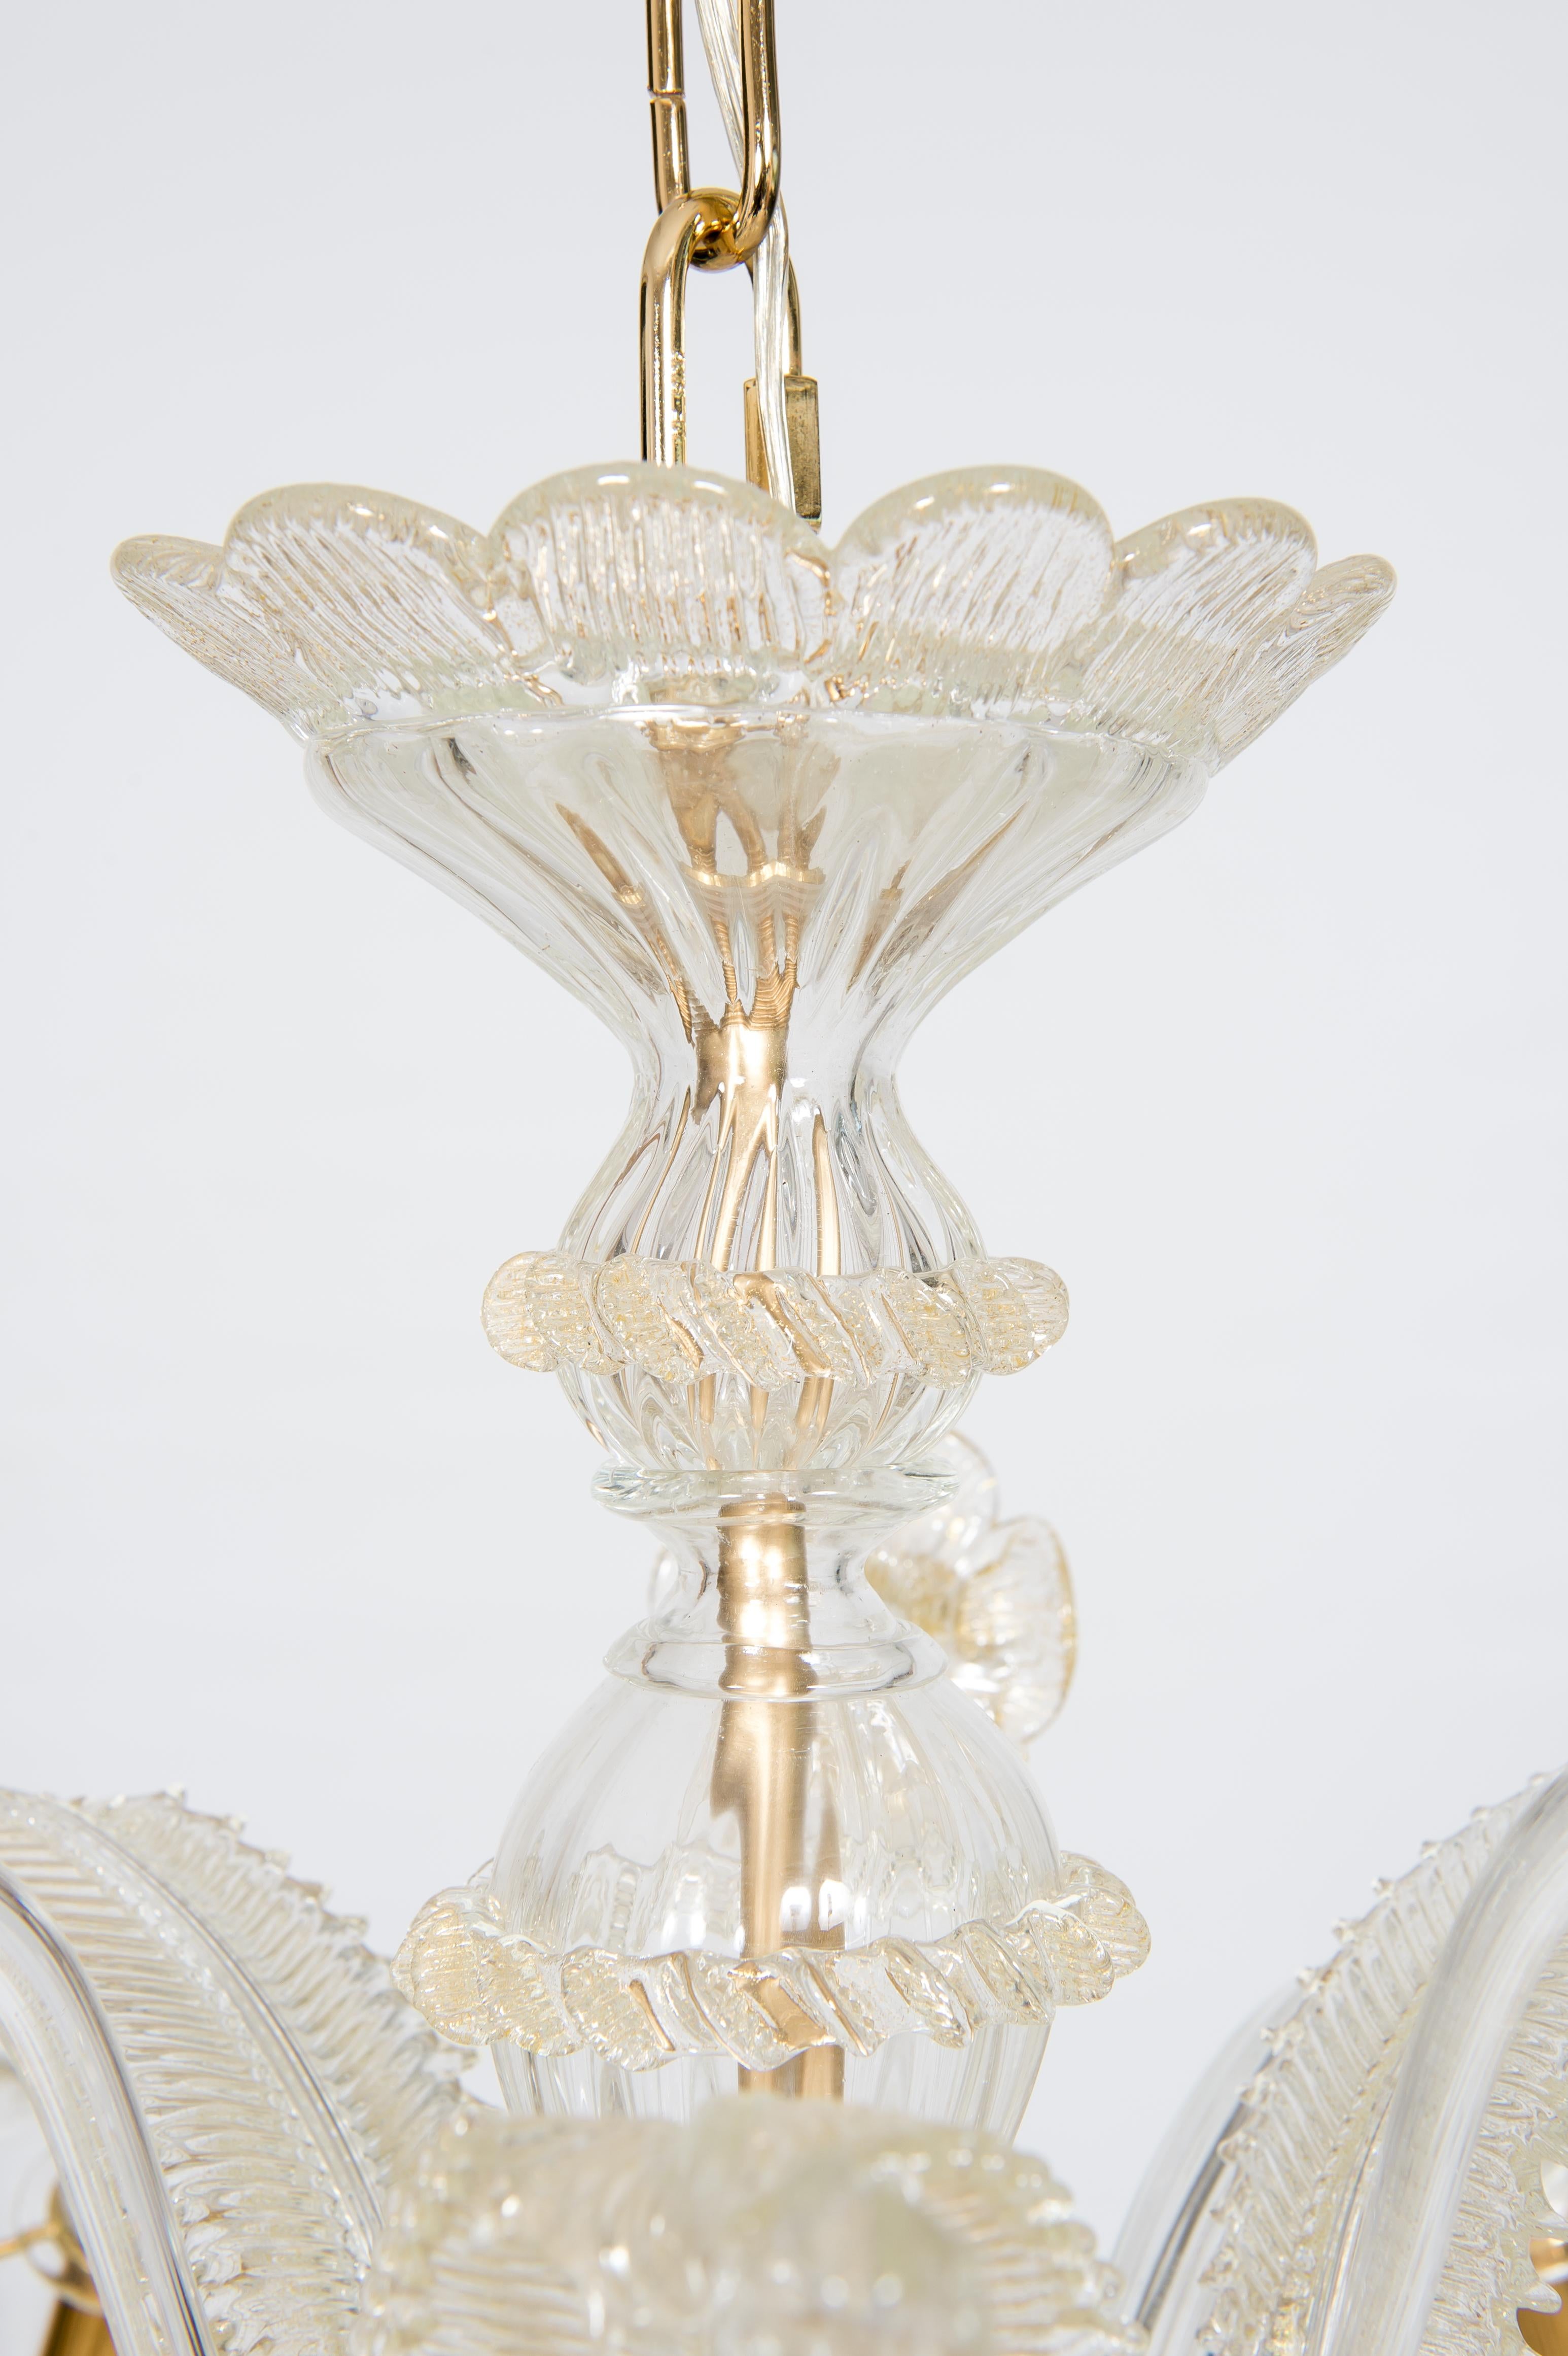 Golden Murano Glass Chandelier with 9 Lights, 21st Century, Italy For Sale 2